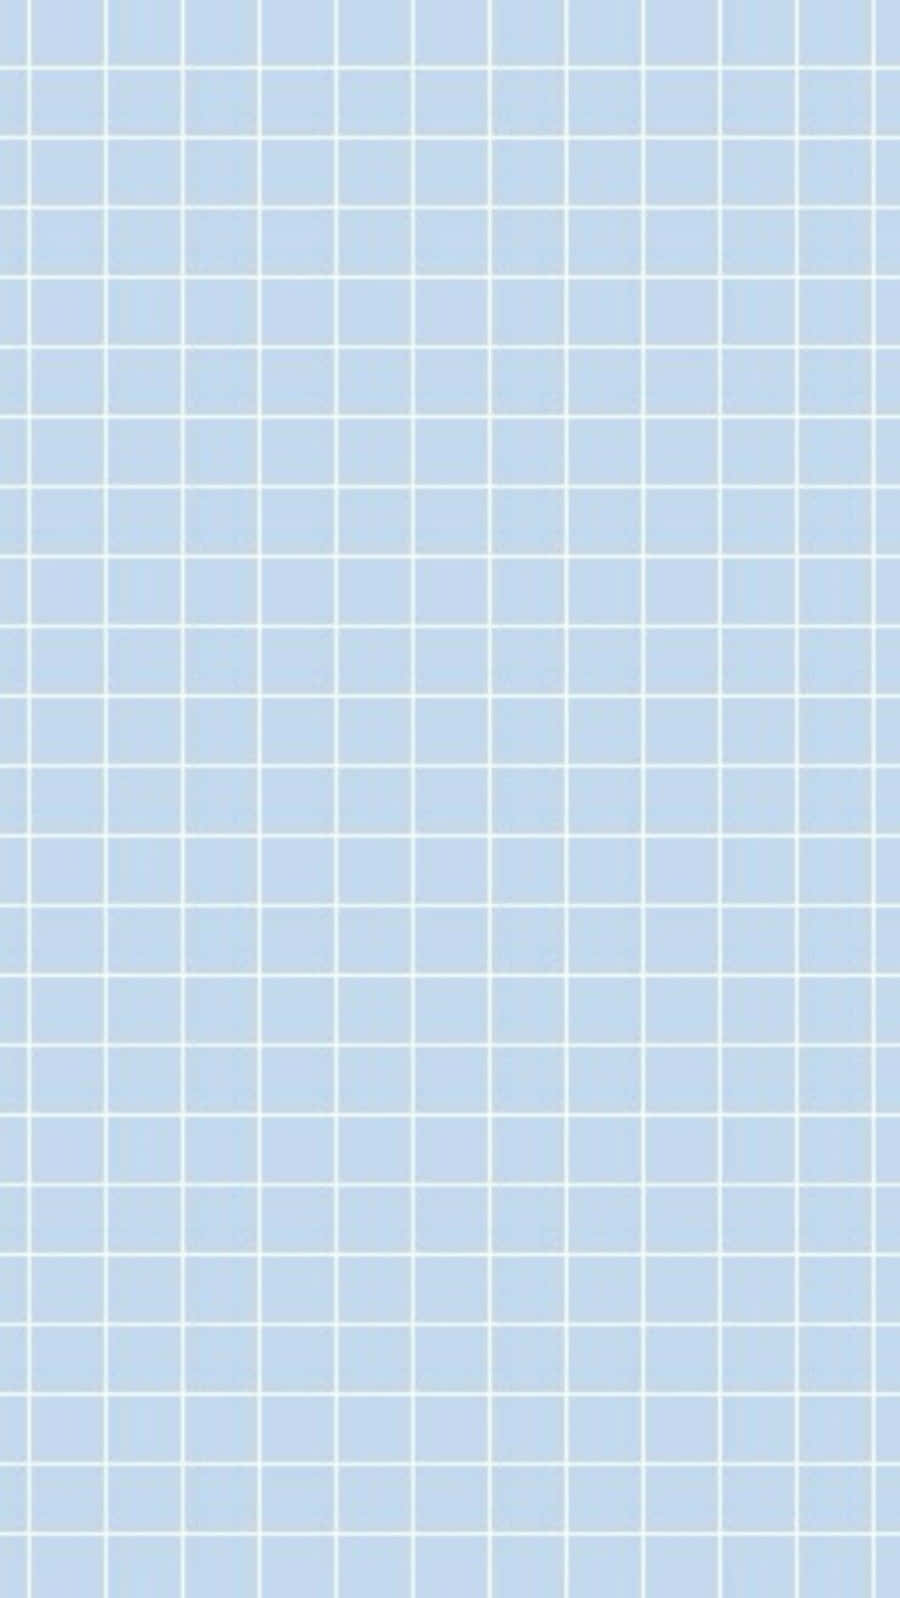 A blue and white checkerboard pattern - Grid